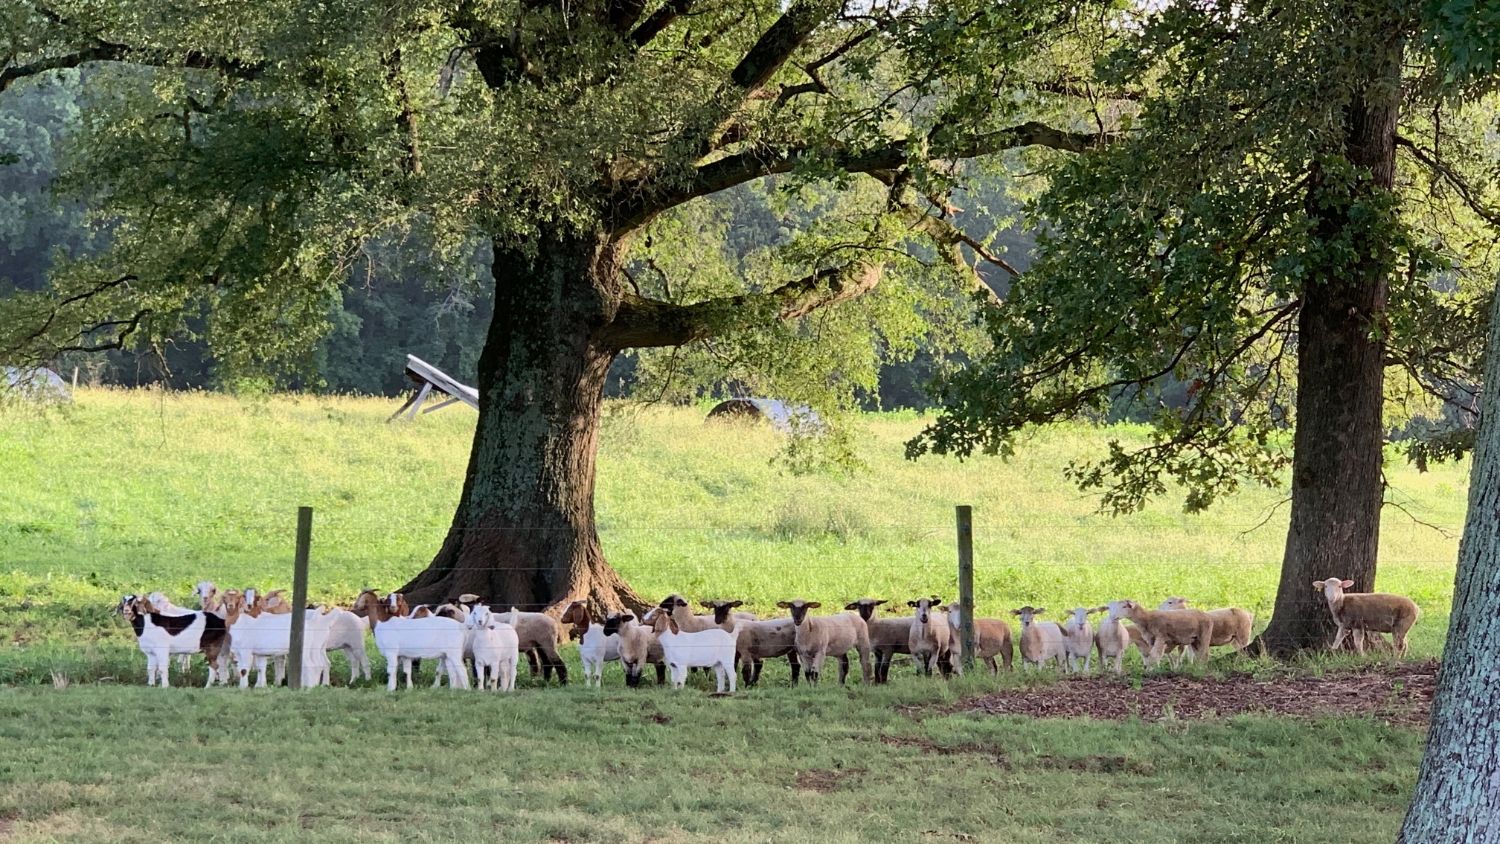 a herd of sheep and goats stand under a large tree inside a pasture fence